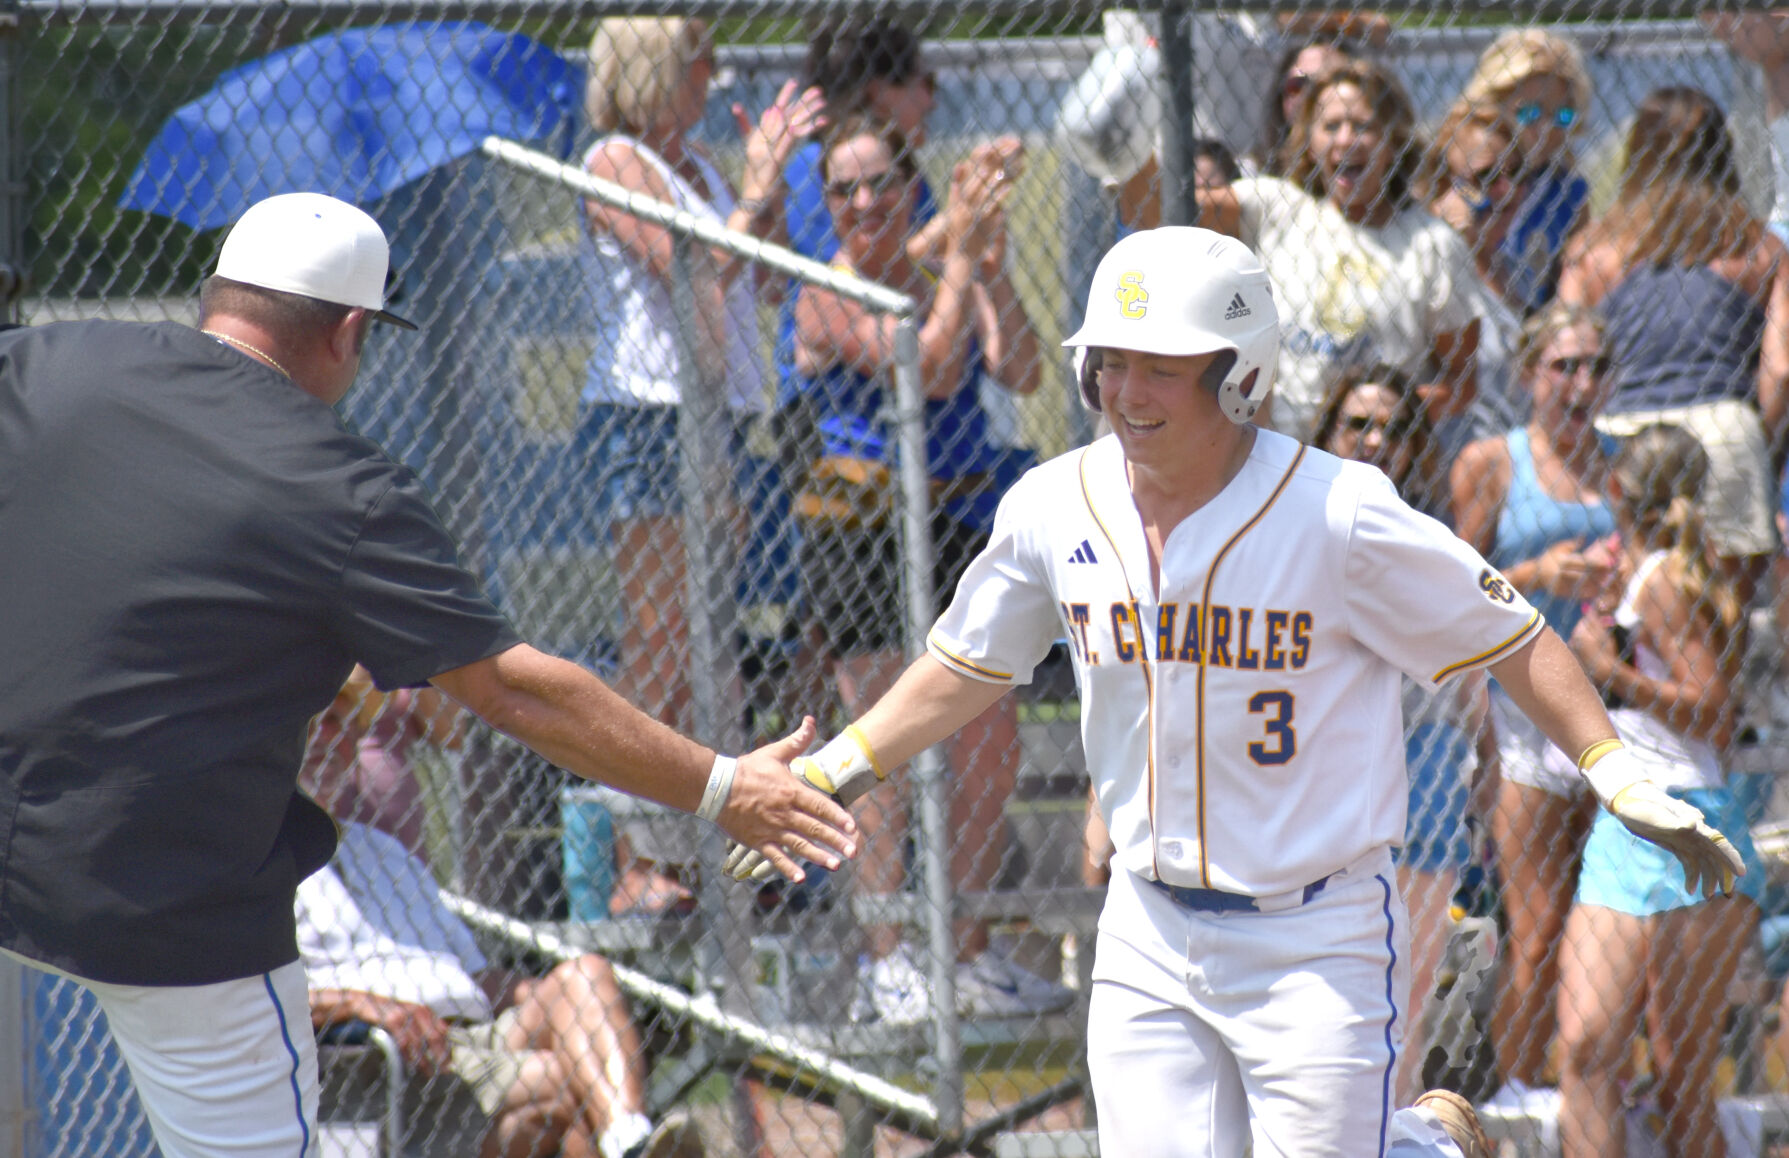 A senior belted a grand slam to send St. Charles back to Sulphur in style